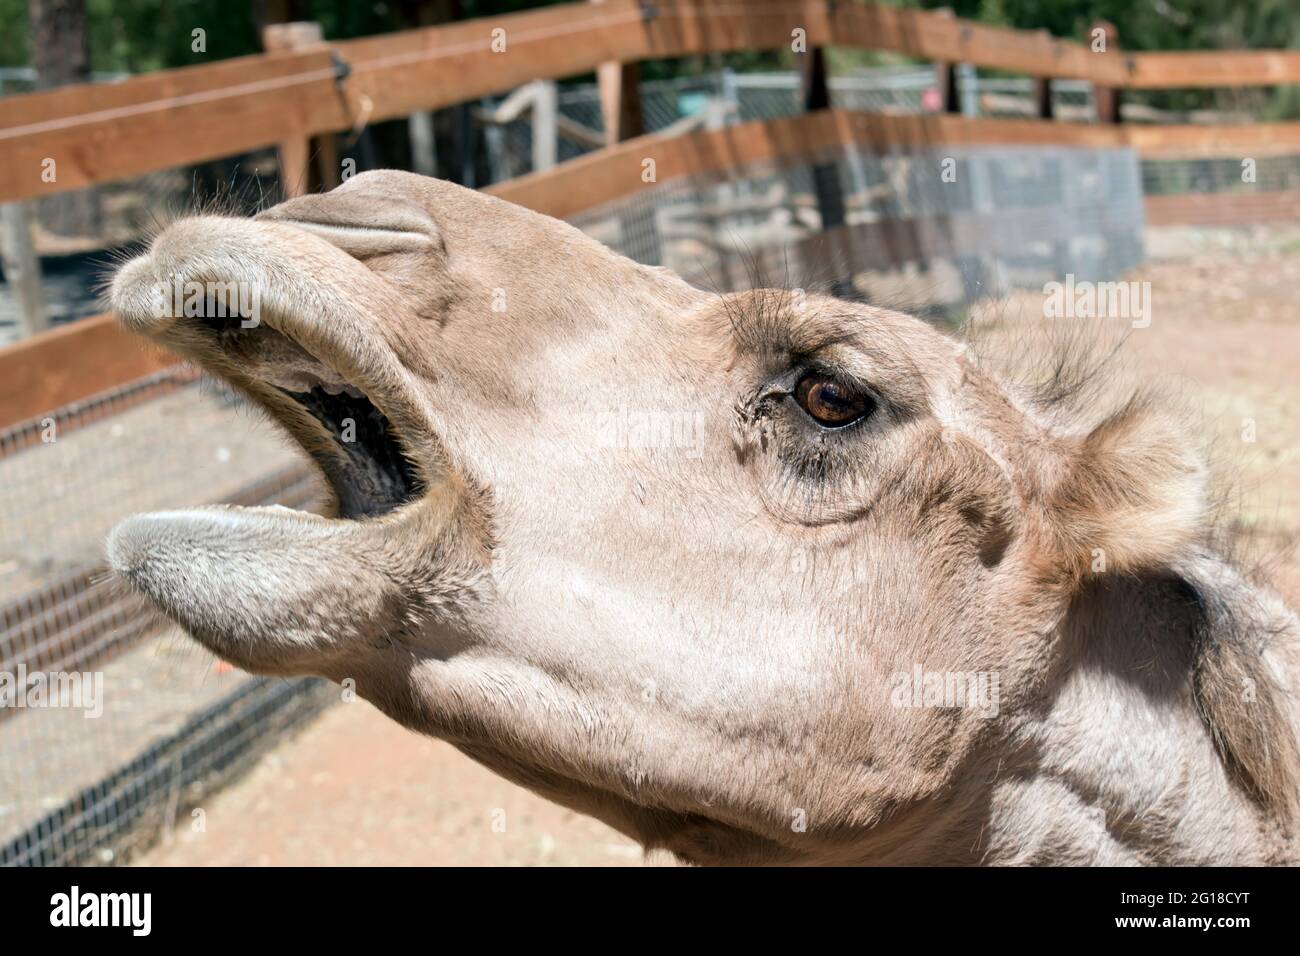 the camel has brown fur and brown eyes and one hump Stock Photo - Alamy